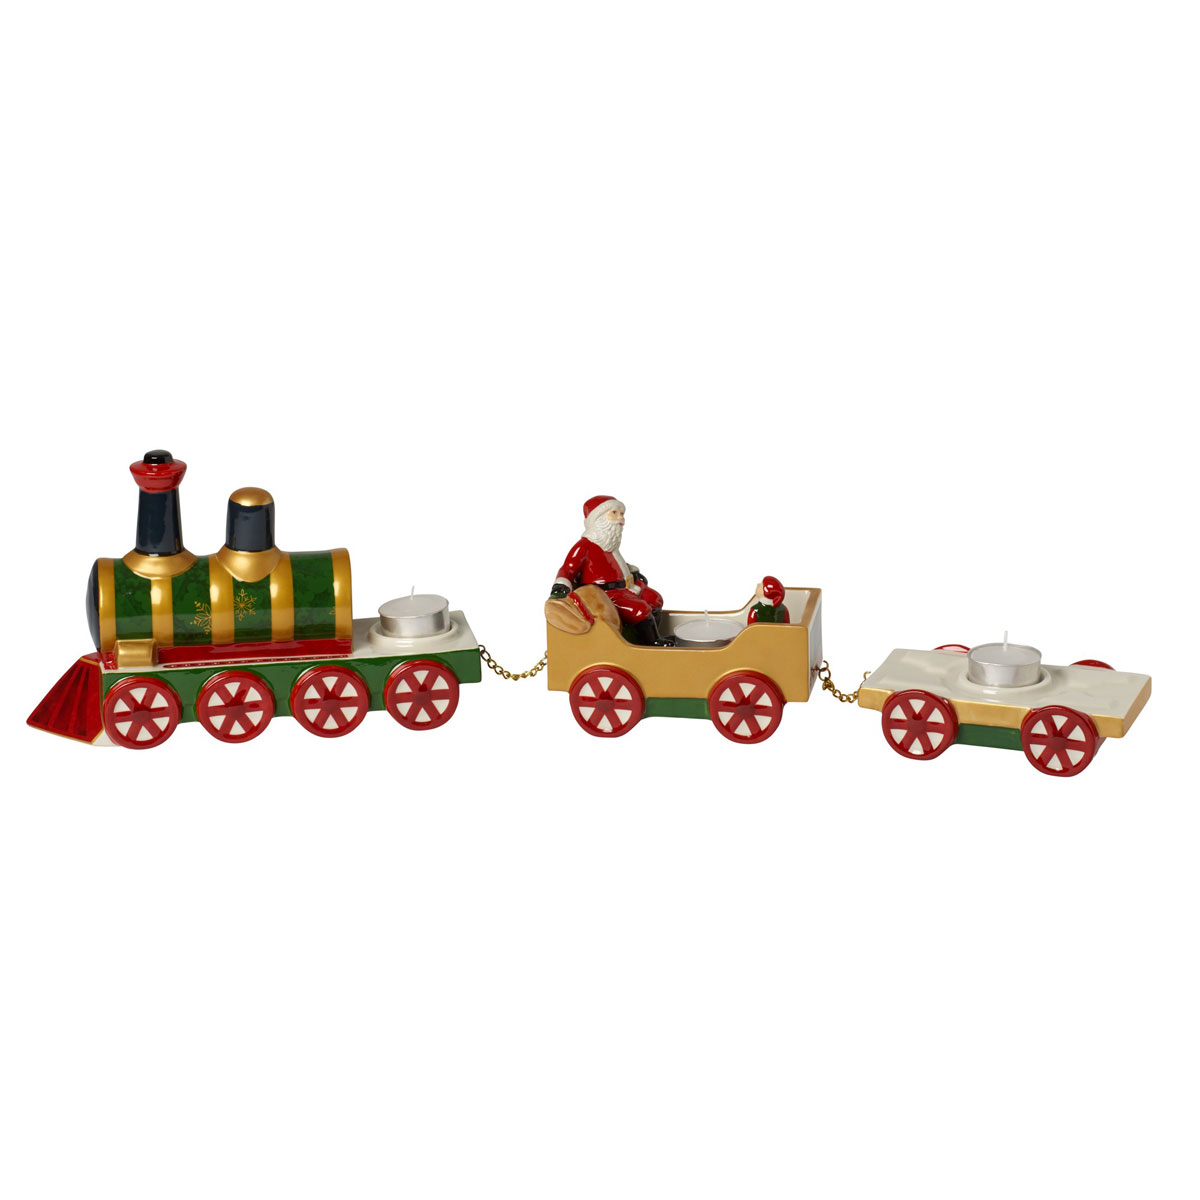 Villeroy and Boch Christmas Toys Memory North Pole Express 3 Piece Train